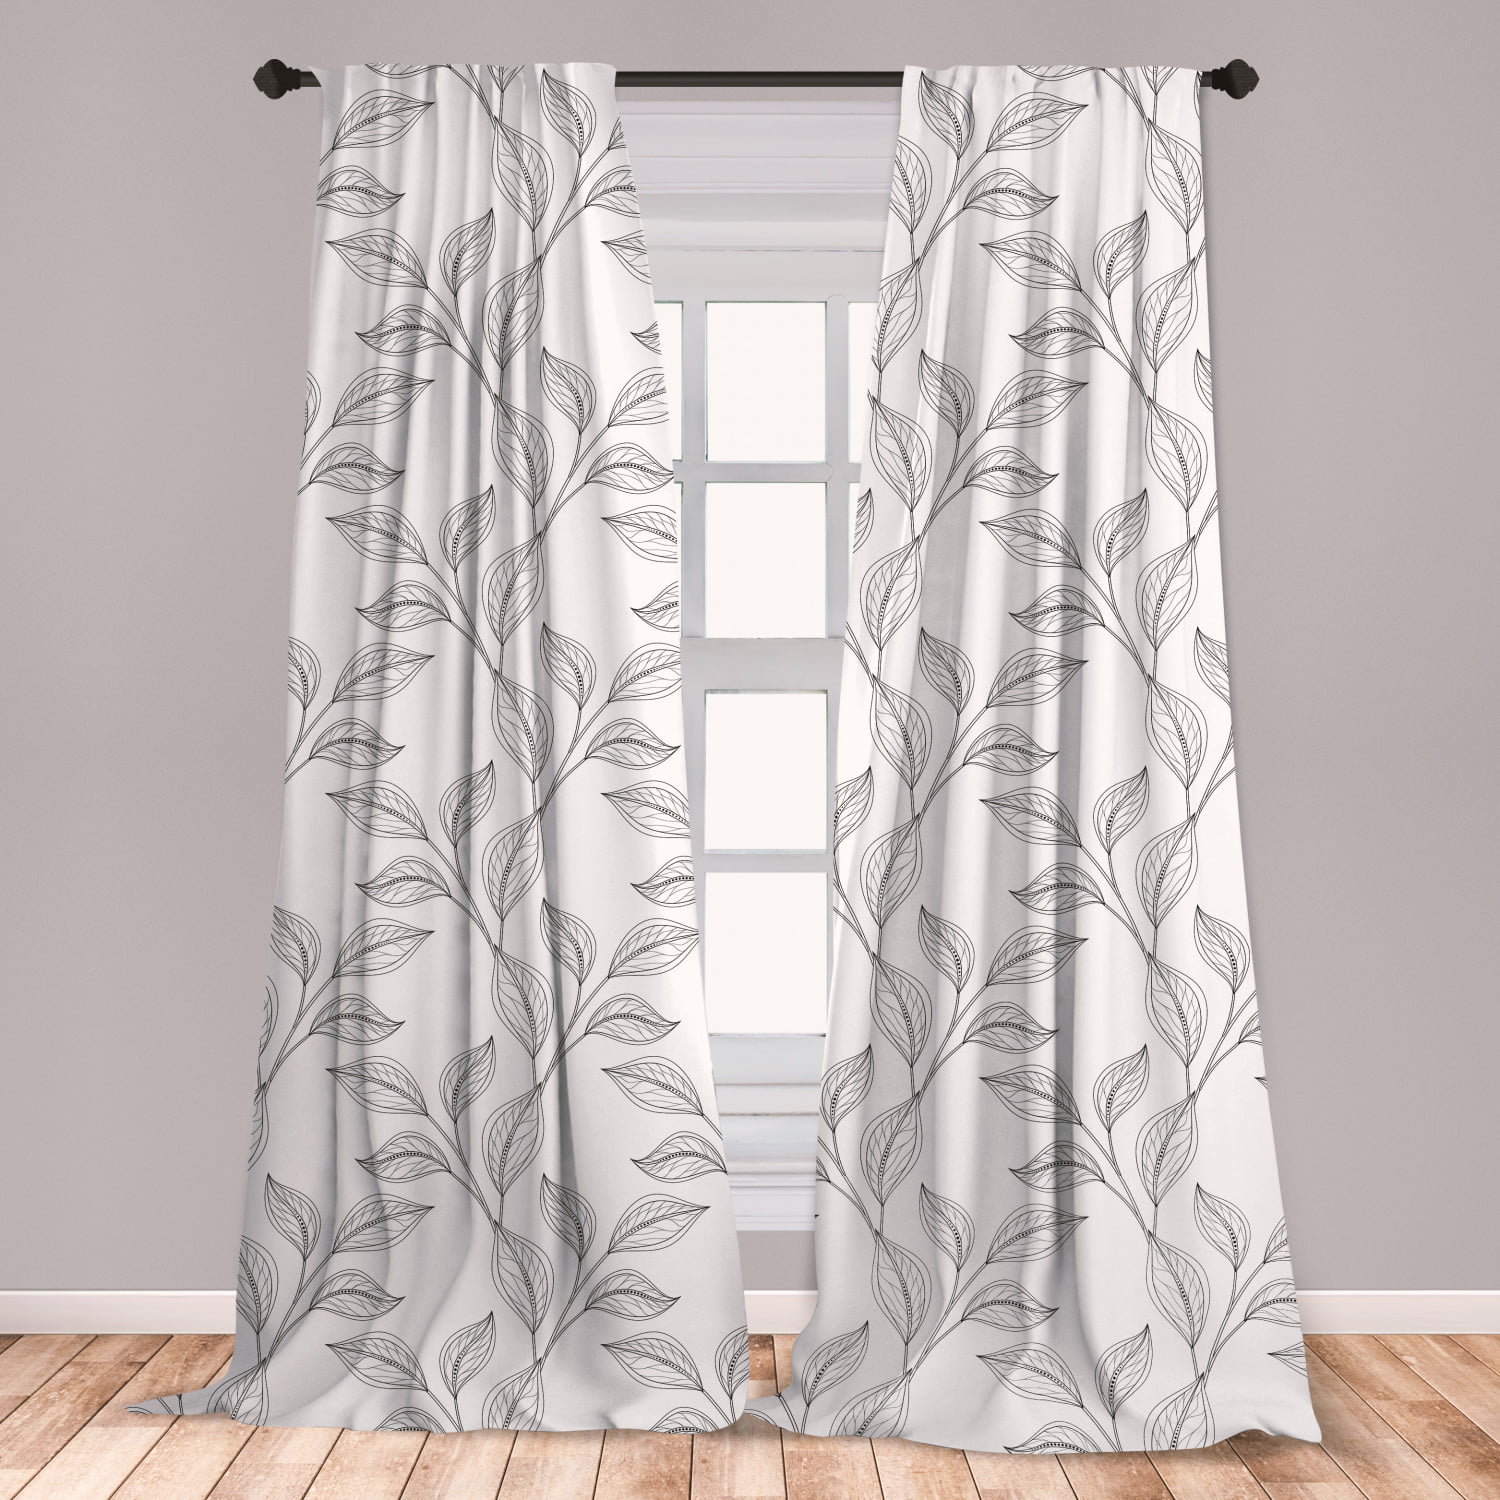 Black and White Curtains 2 Panels Set, Monochrome Garden Pattern with